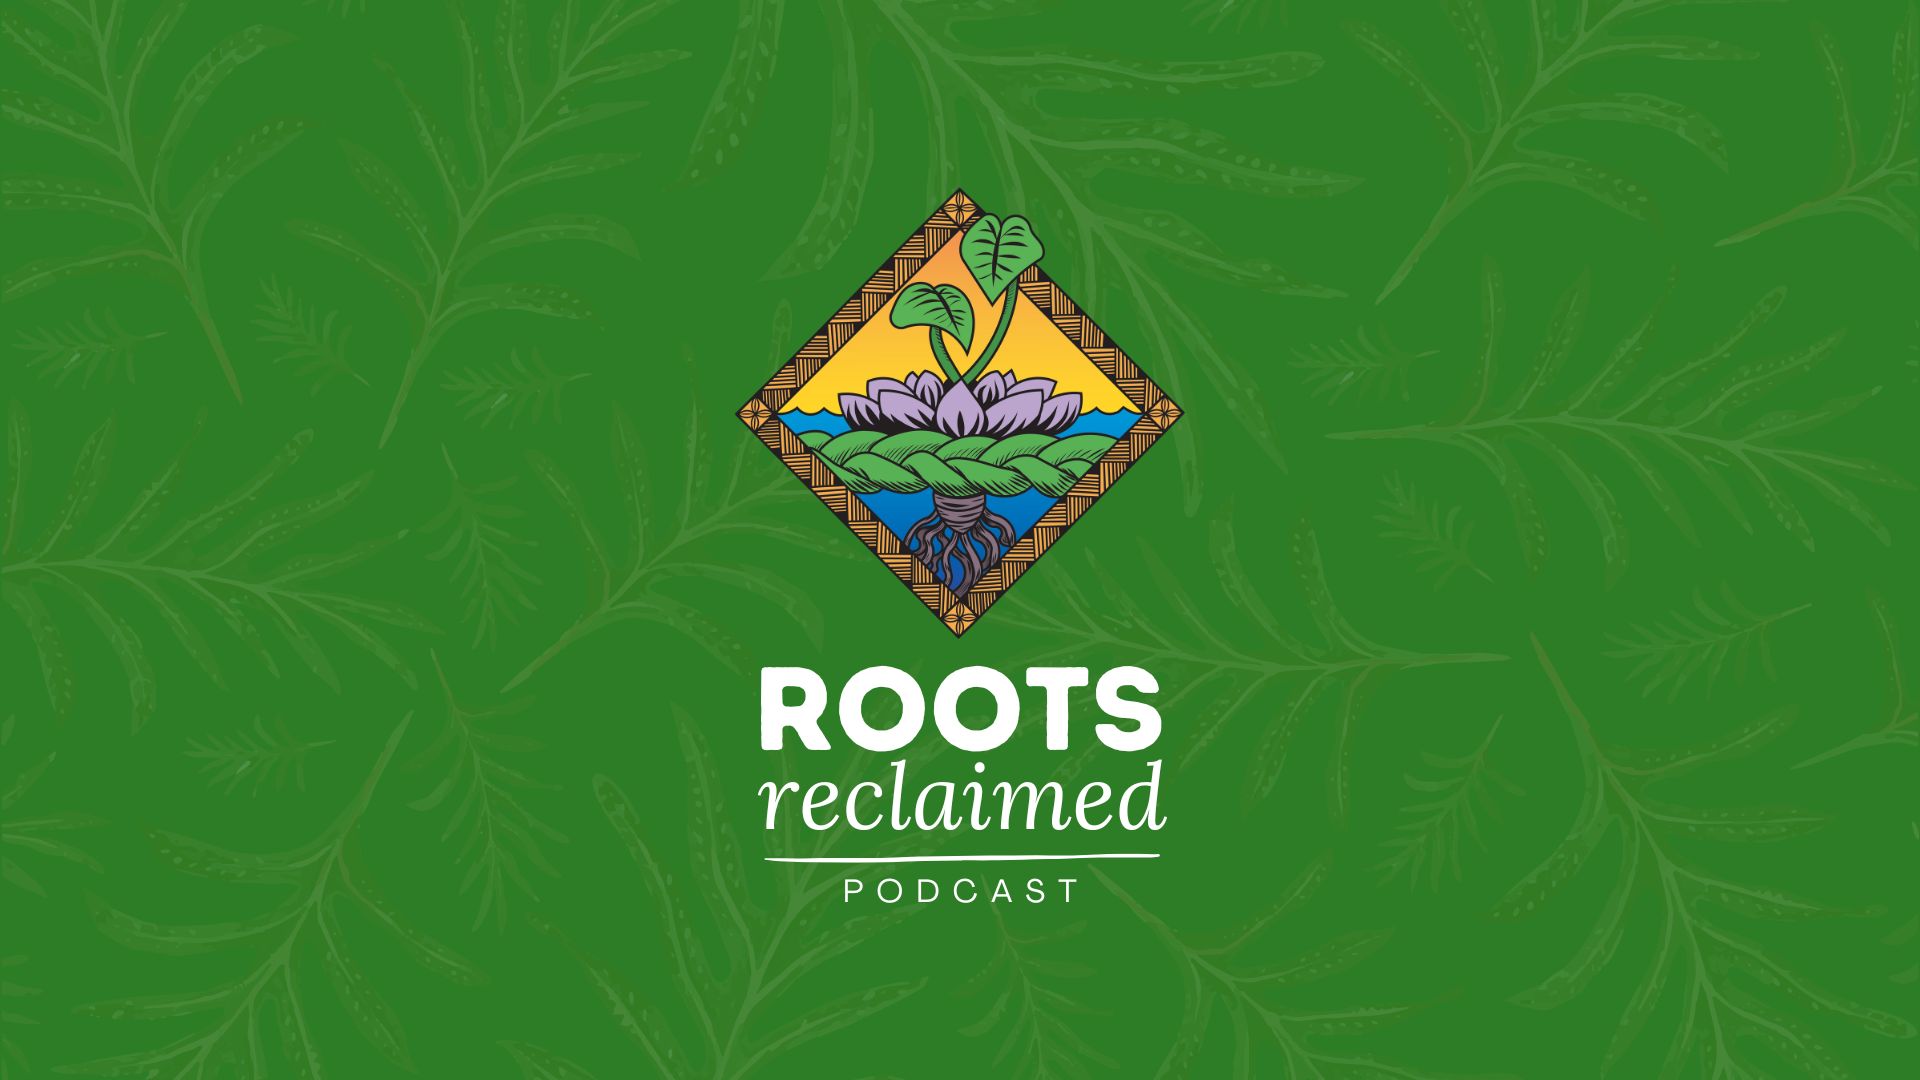 Introducing Roots Reclaimed